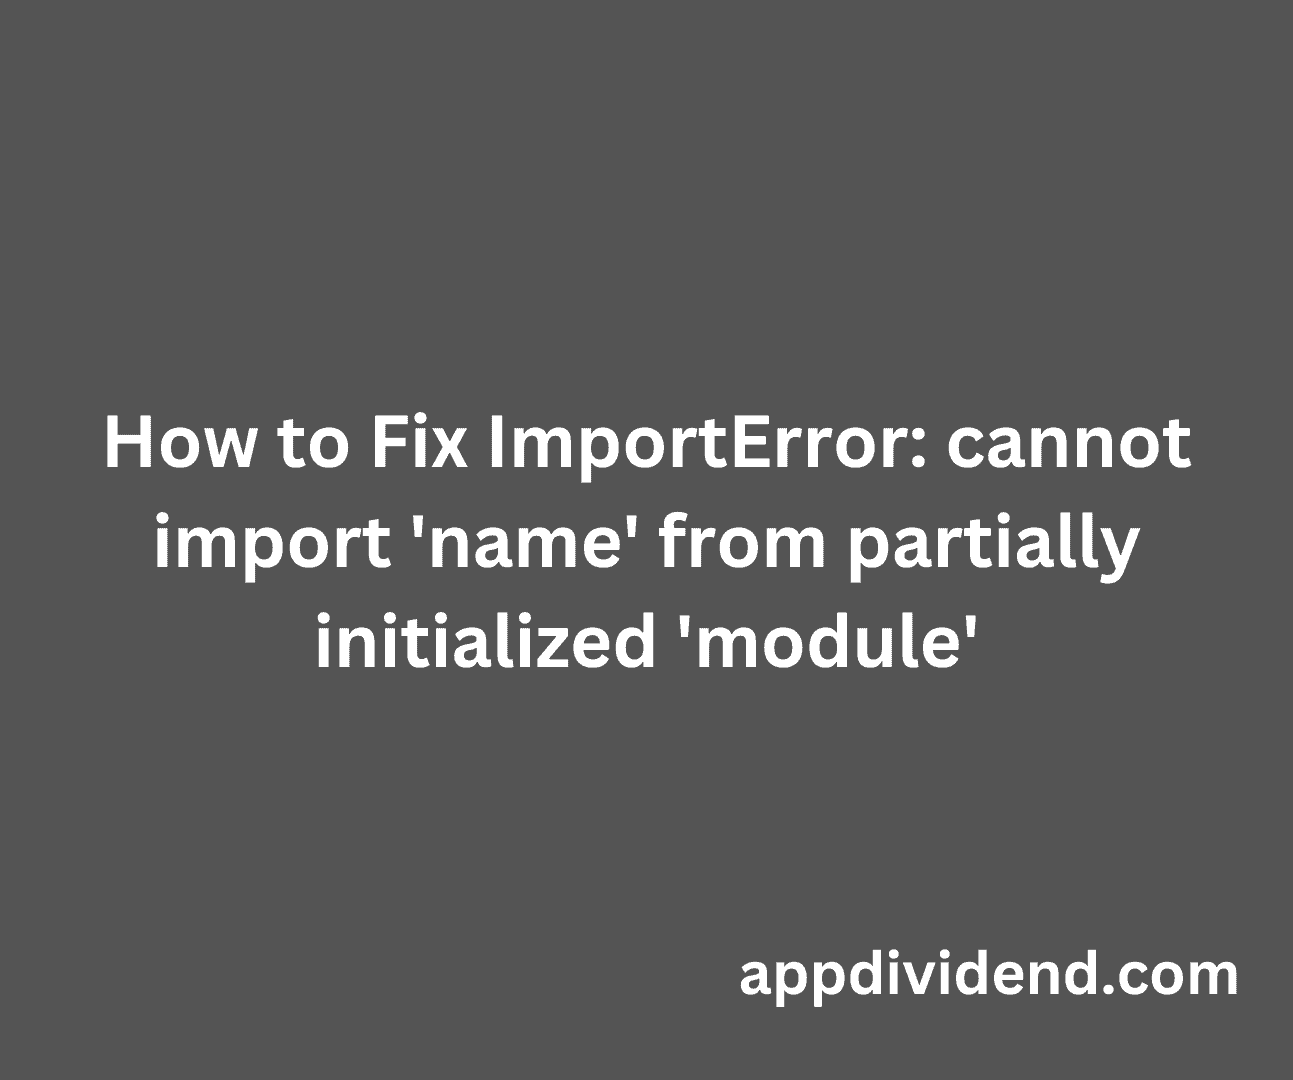 How to Fix ImportError - cannot import 'name' from partially initialized 'module'